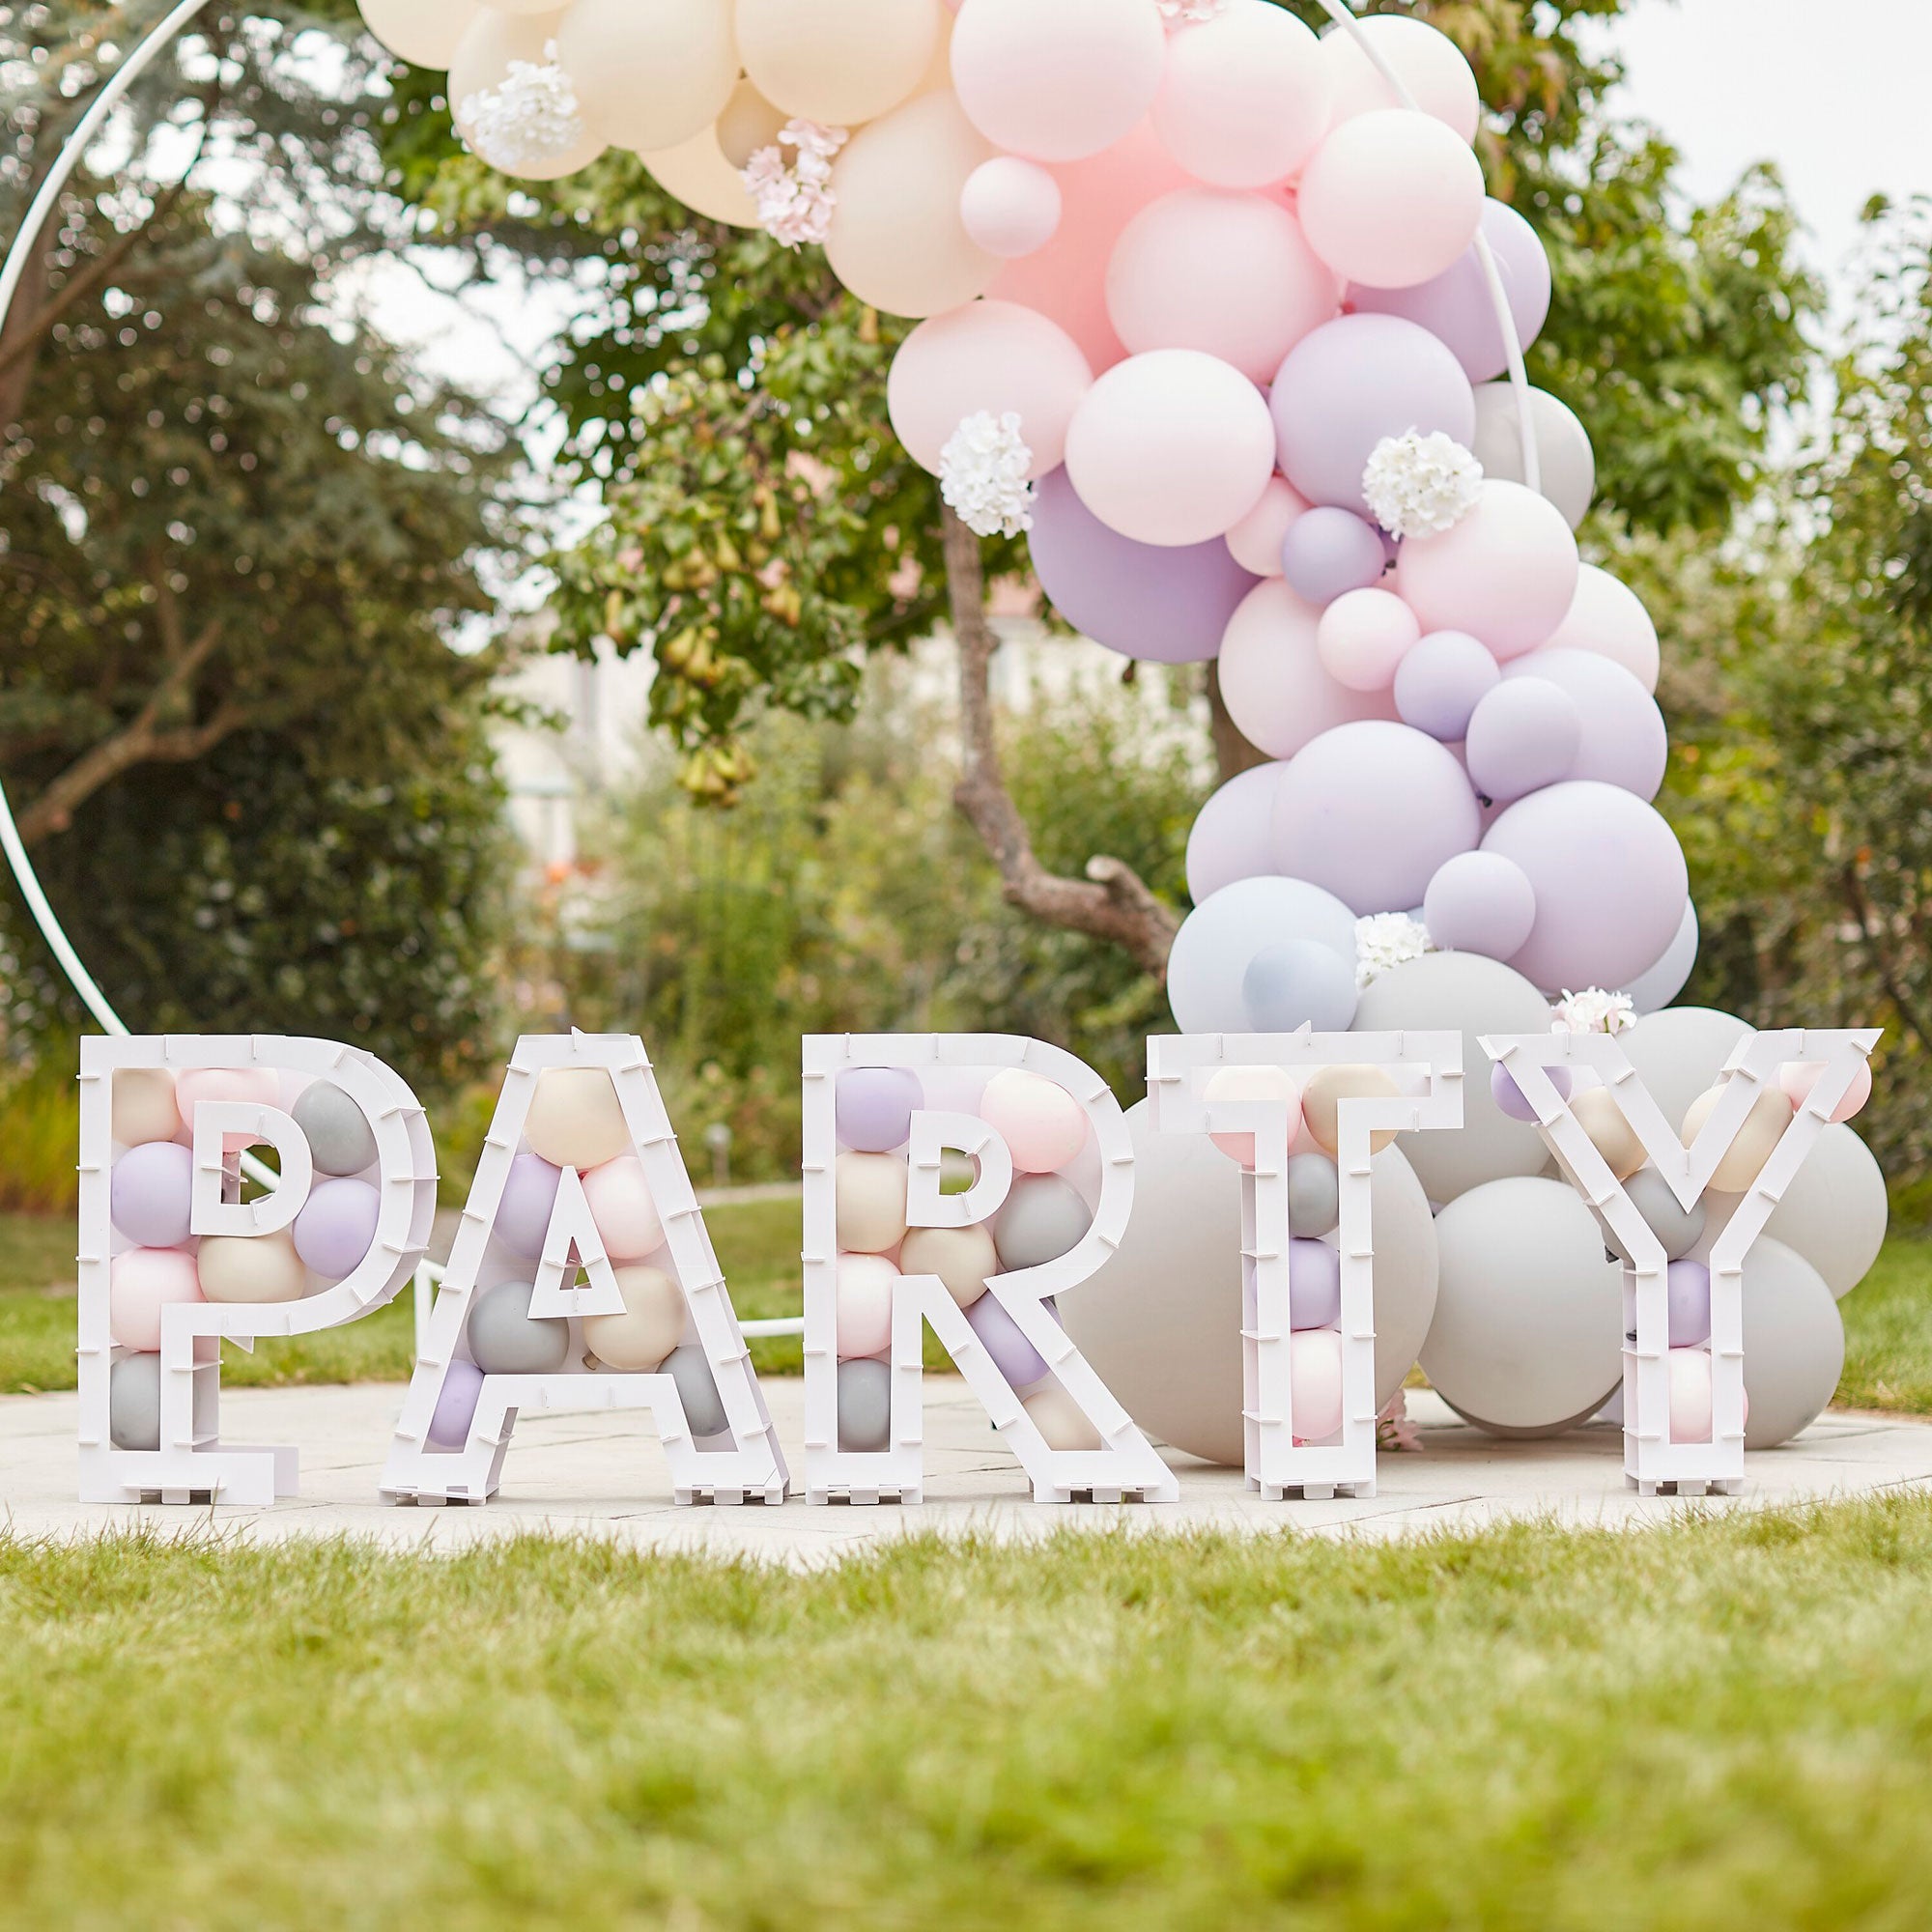 Mix It Up Party Balloon Mosaic Stand Decoration